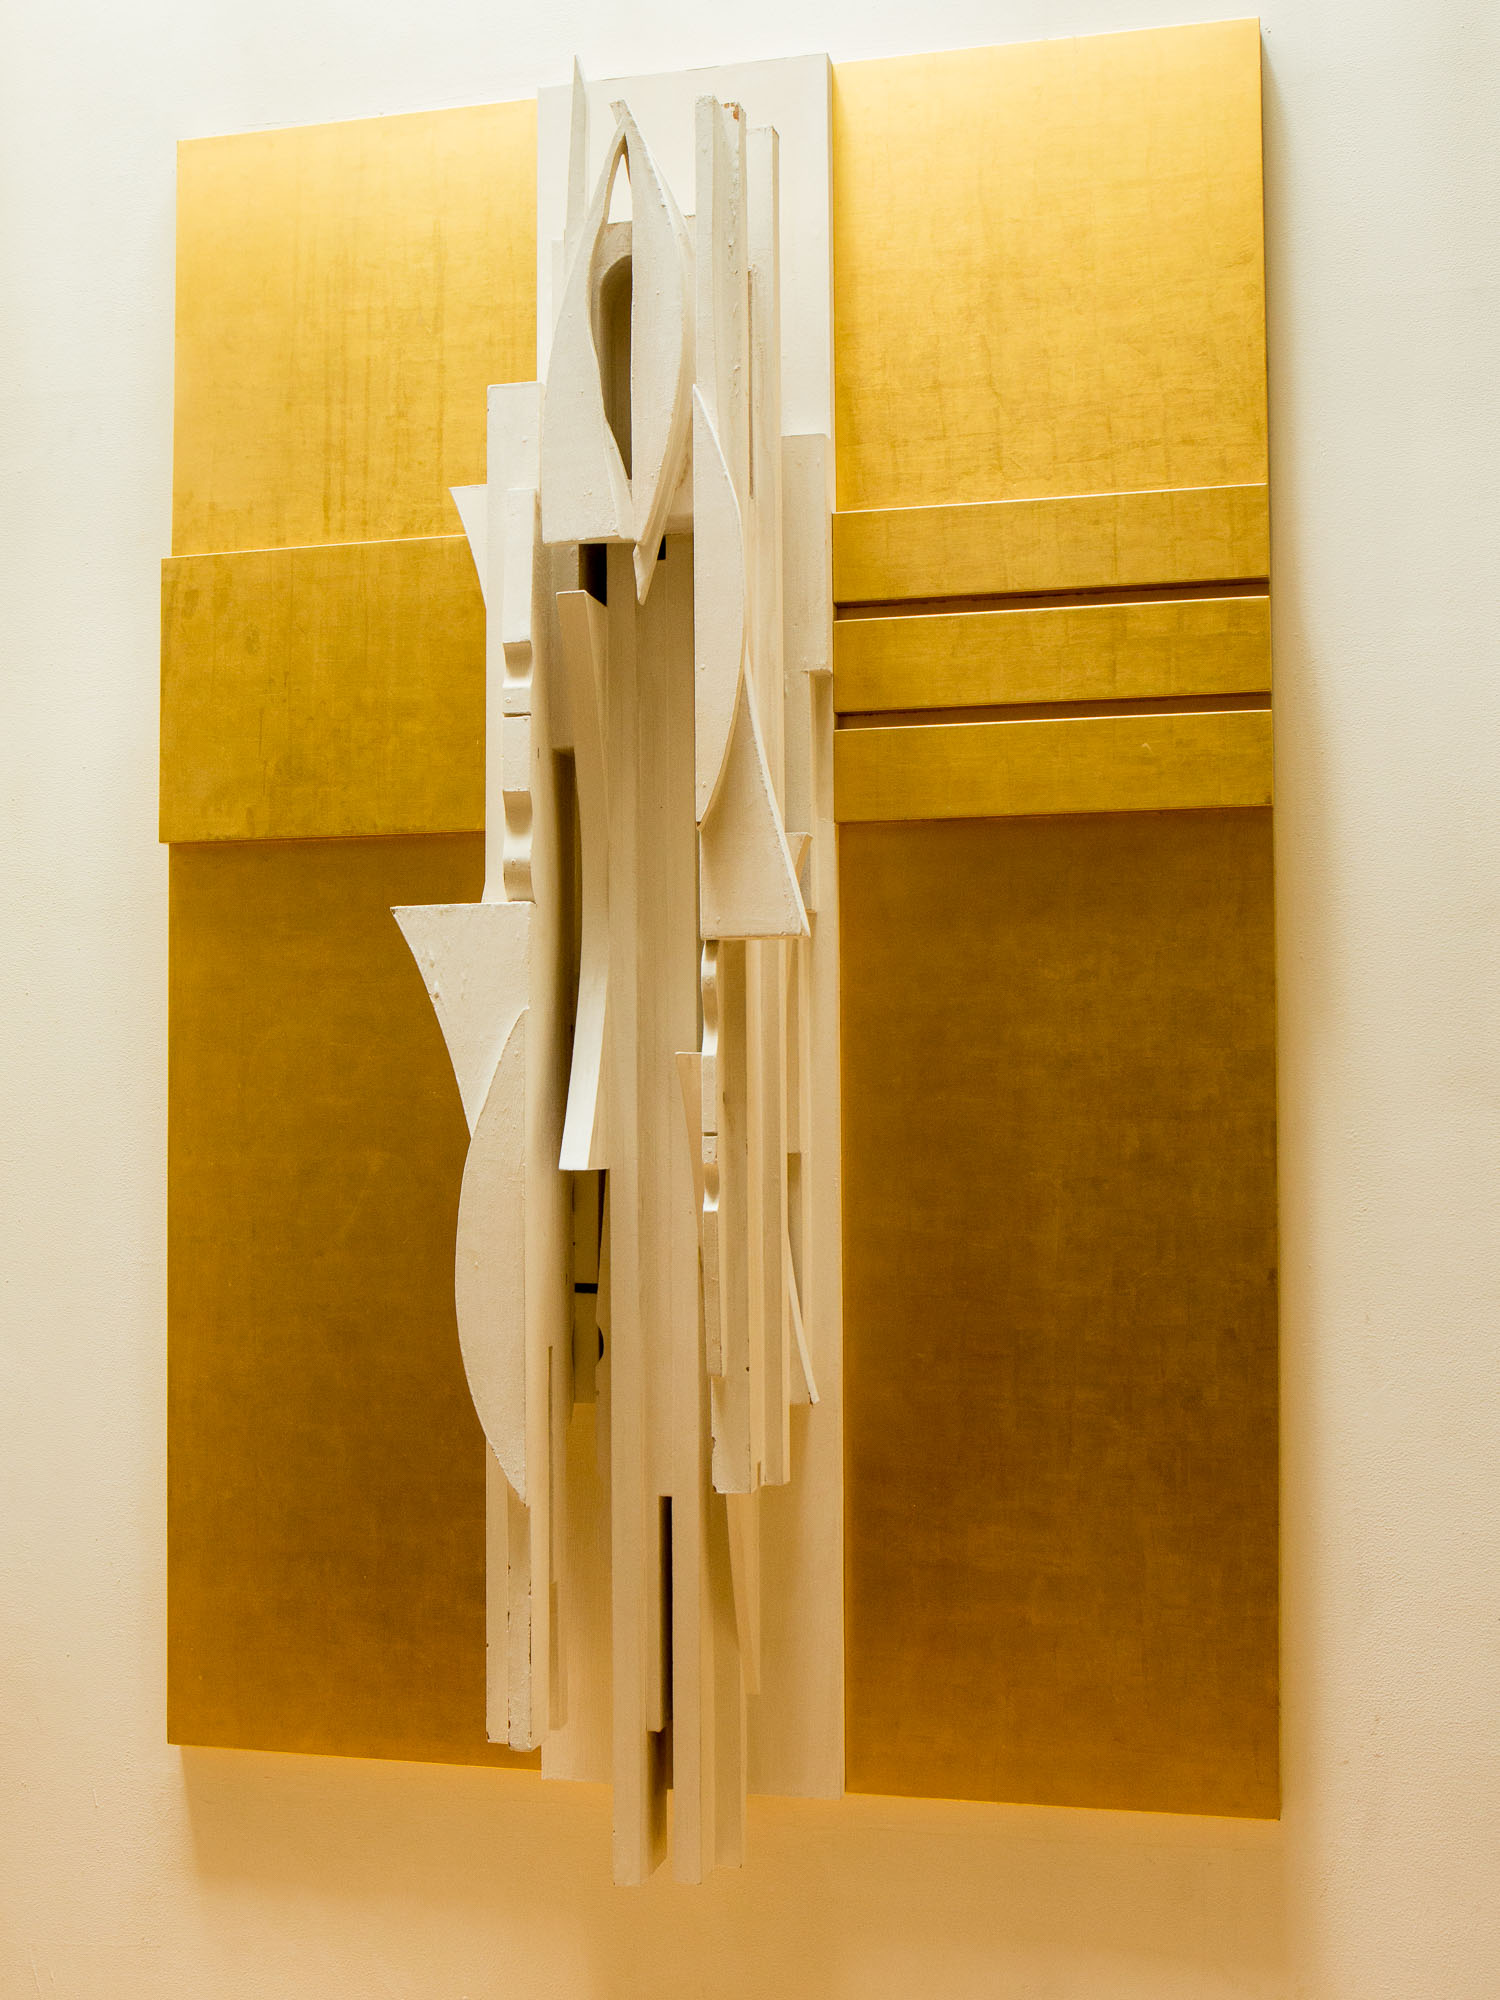 A crucifix by sculptor Louise Nevelson in the Chapel of the Good Shepherd of St. Peter's Church.